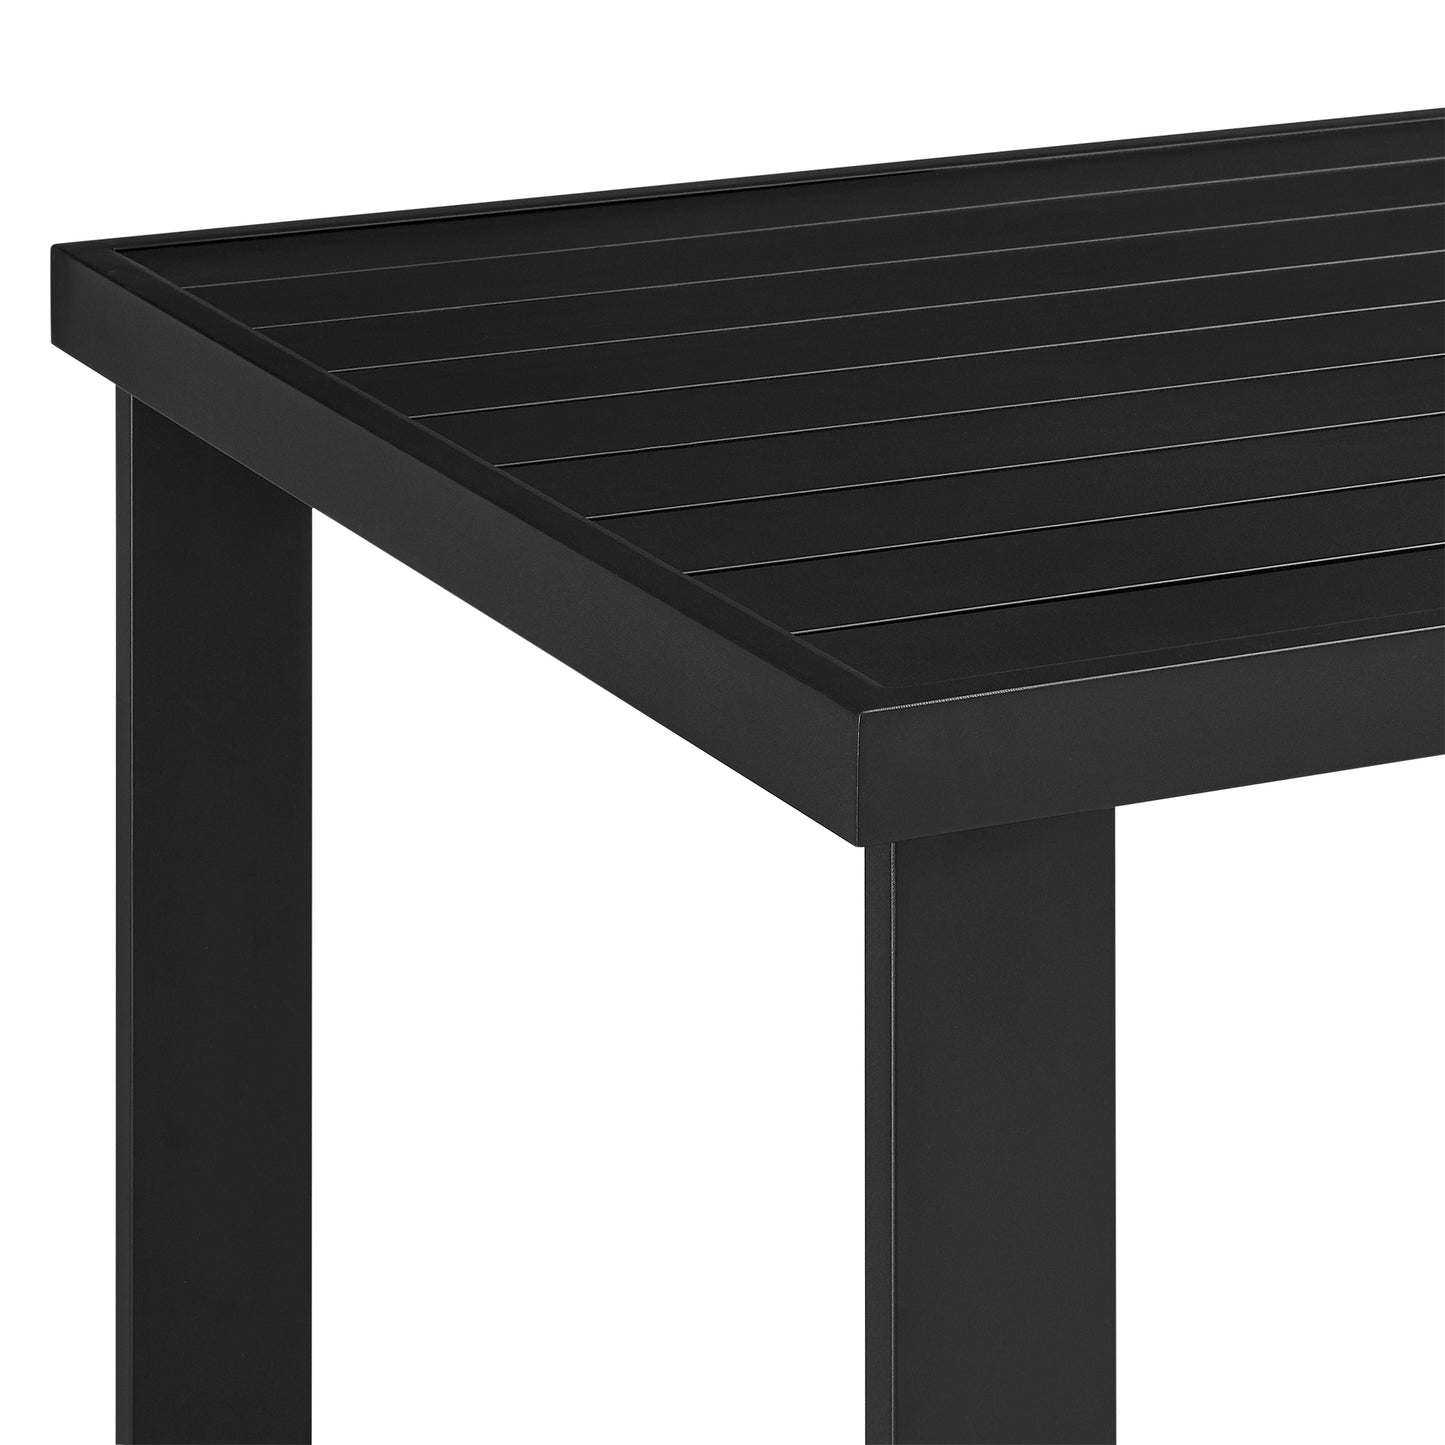 Alegria Outdoor Patio Bar Height Dining Table in Aluminum